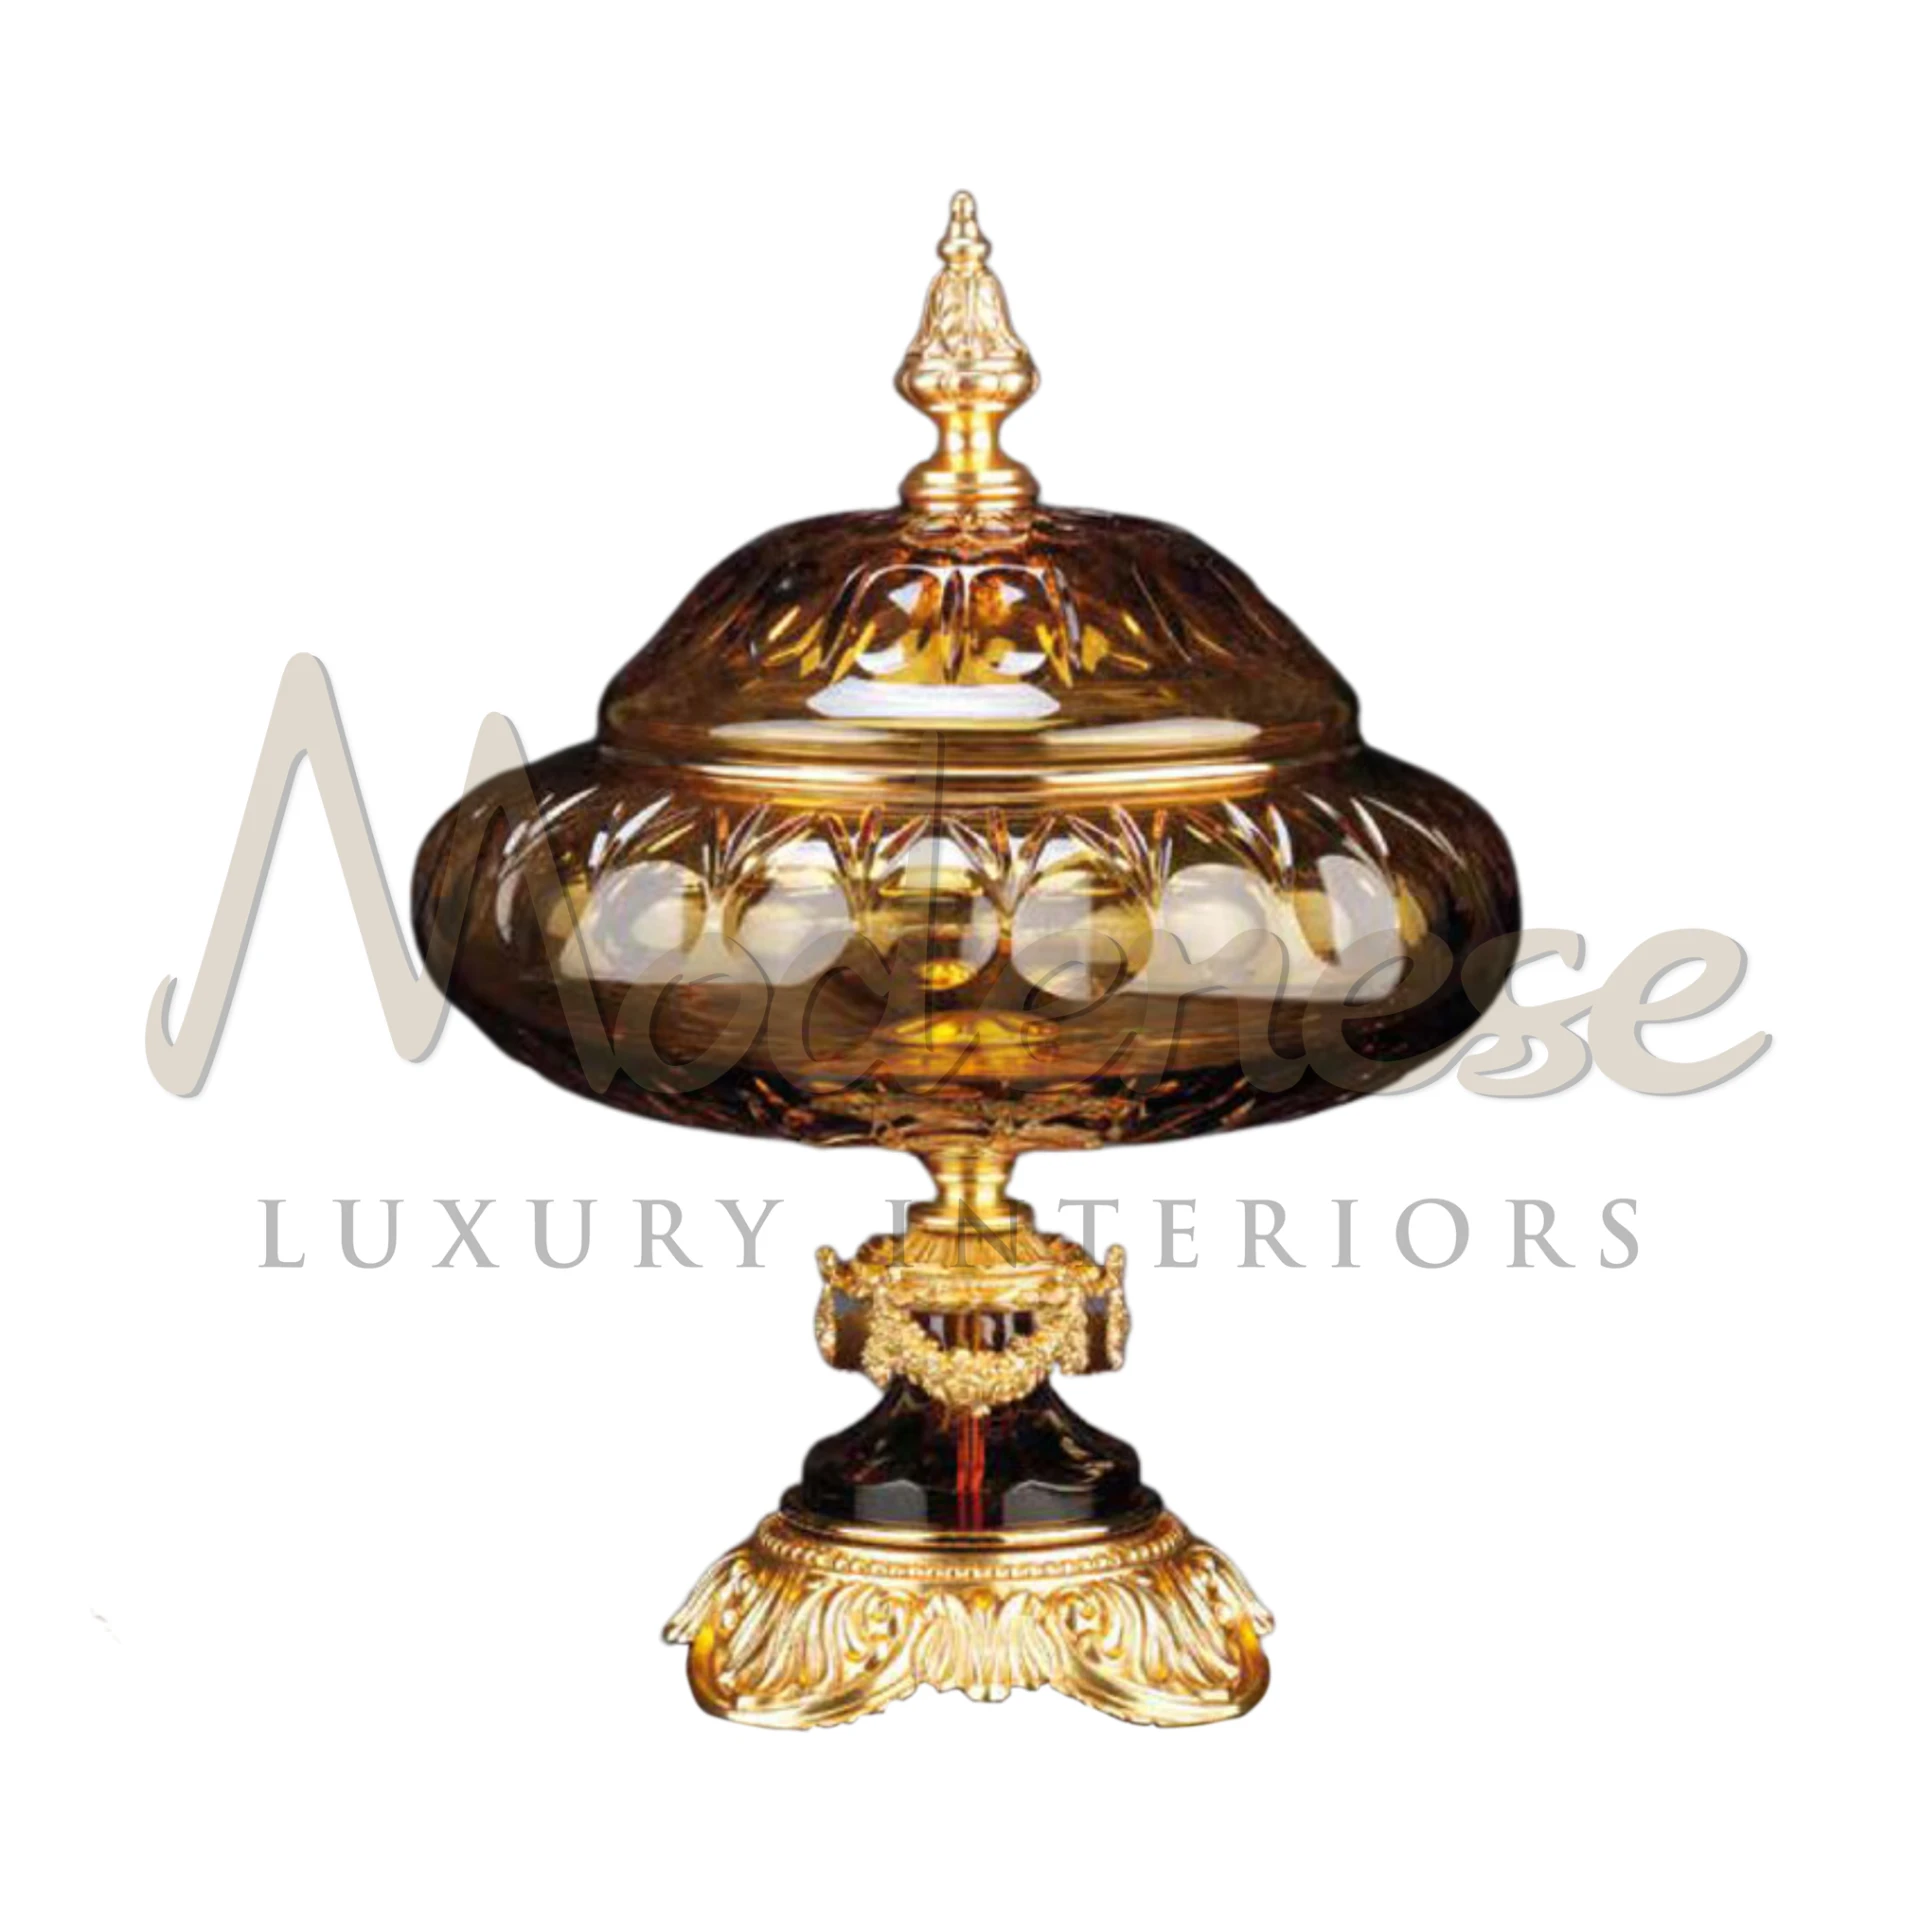 Modenese Traditional Glass Bowl, symbol of elegance and traditional style, perfect for luxury interior design and high-end decor.






